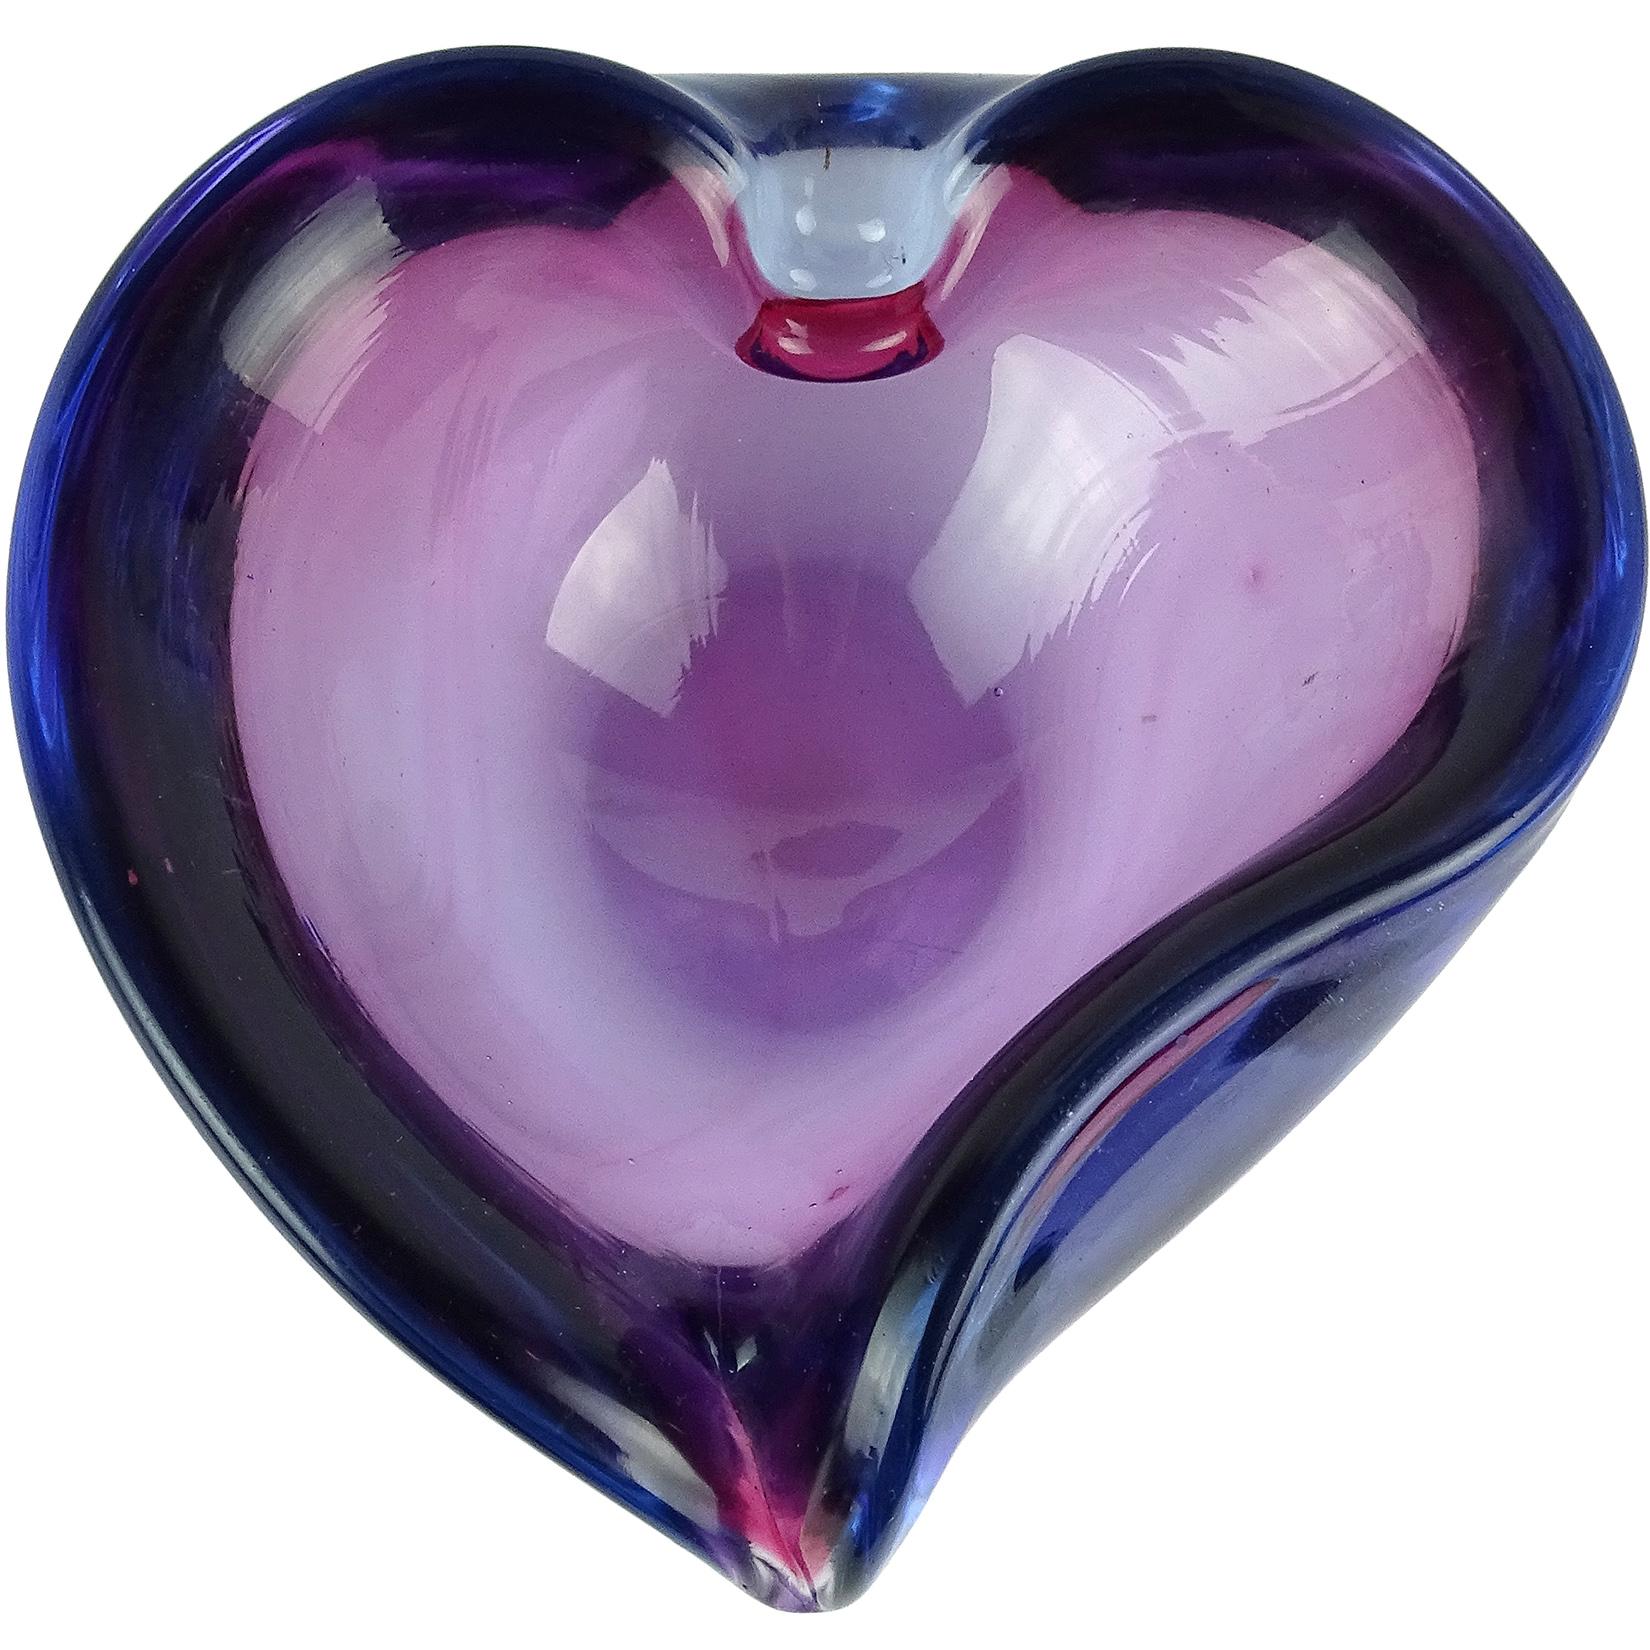 Beautiful vintage Murano hand blown Sommerso purple and blue Italian art glass Valentine's heart shaped bowl, trinket / ring dish. Documented to Alfredo Barbini, circa 1950-1960. Very sleek lines and rich color. Would make a great display piece on